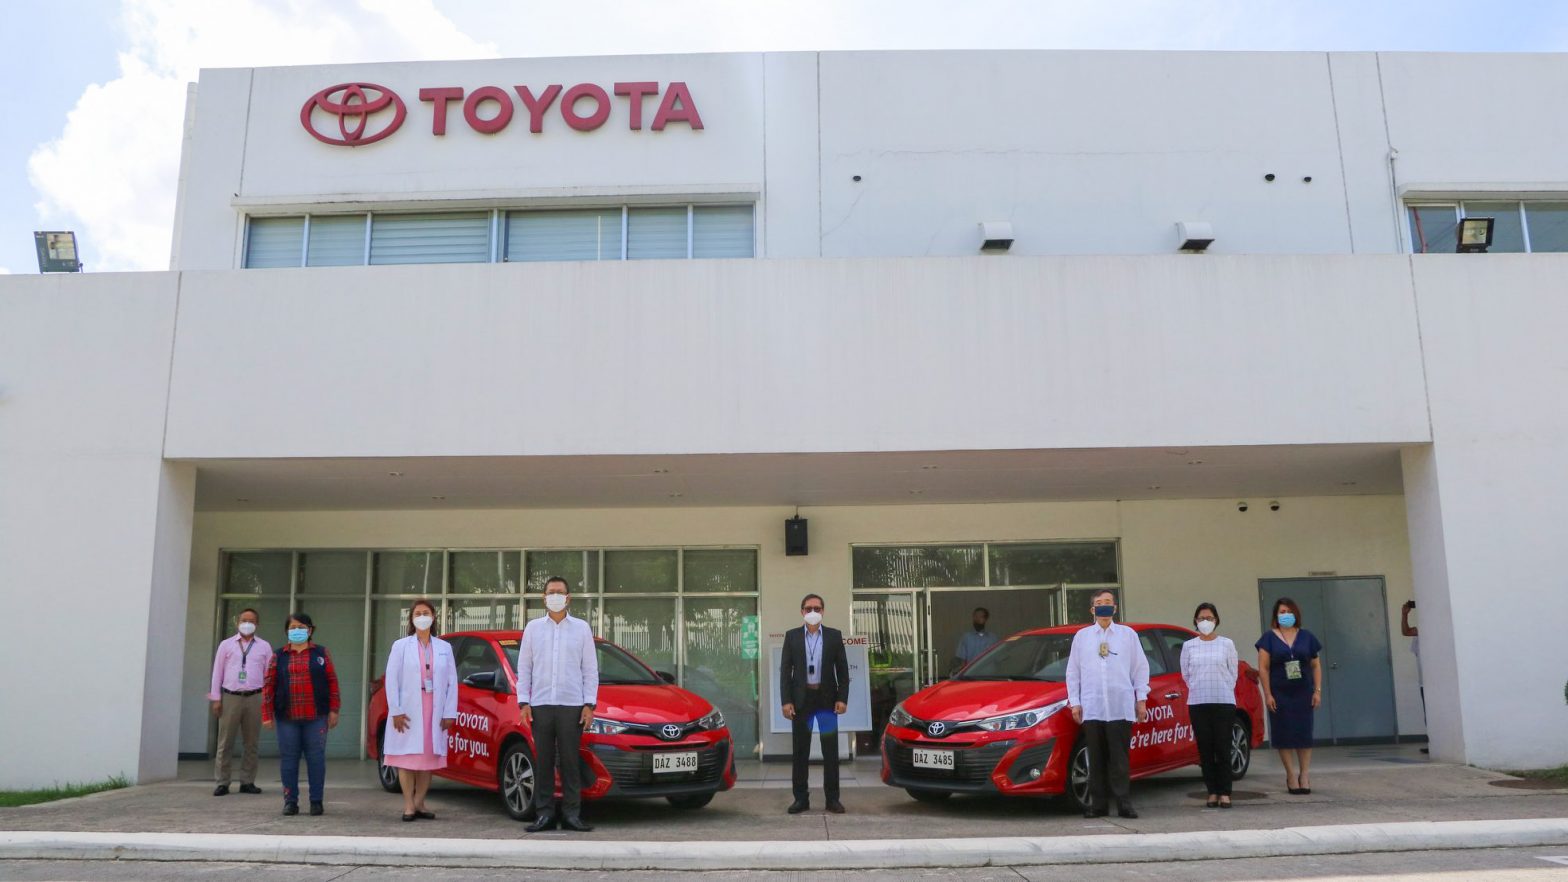 Toyota PH officials optimistic about automotive industry outlook in 2021